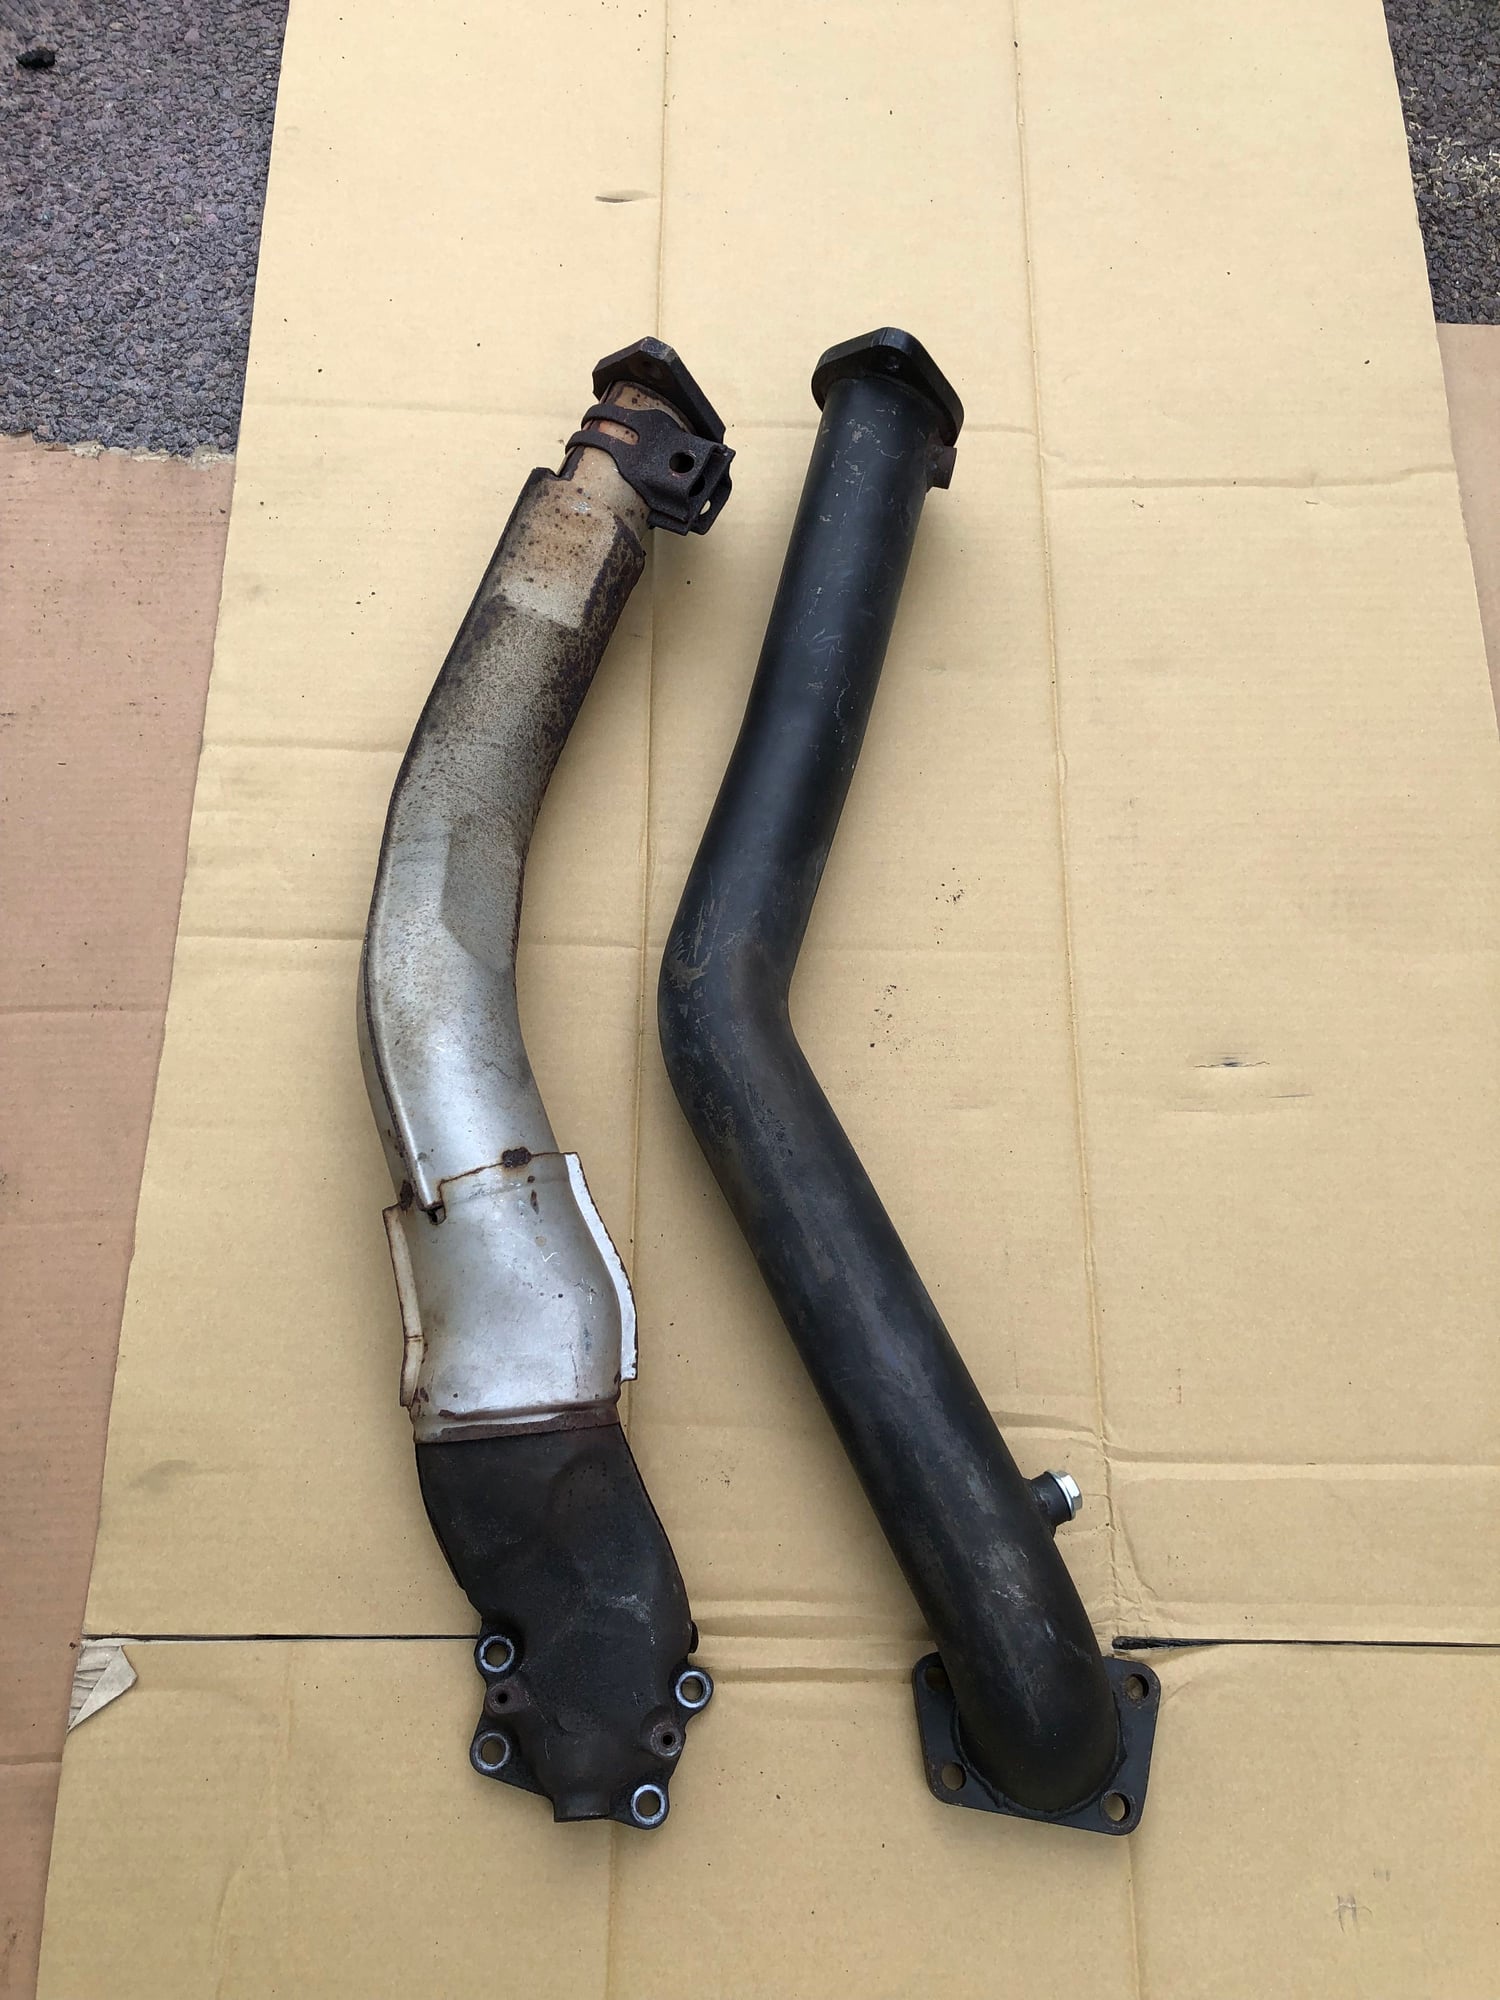 Engine - Exhaust - JDM OEM & Petit Racing Down Pipes - Used - 1992 to 2002 Mazda RX-7 - Seattle, WA 98122, United States